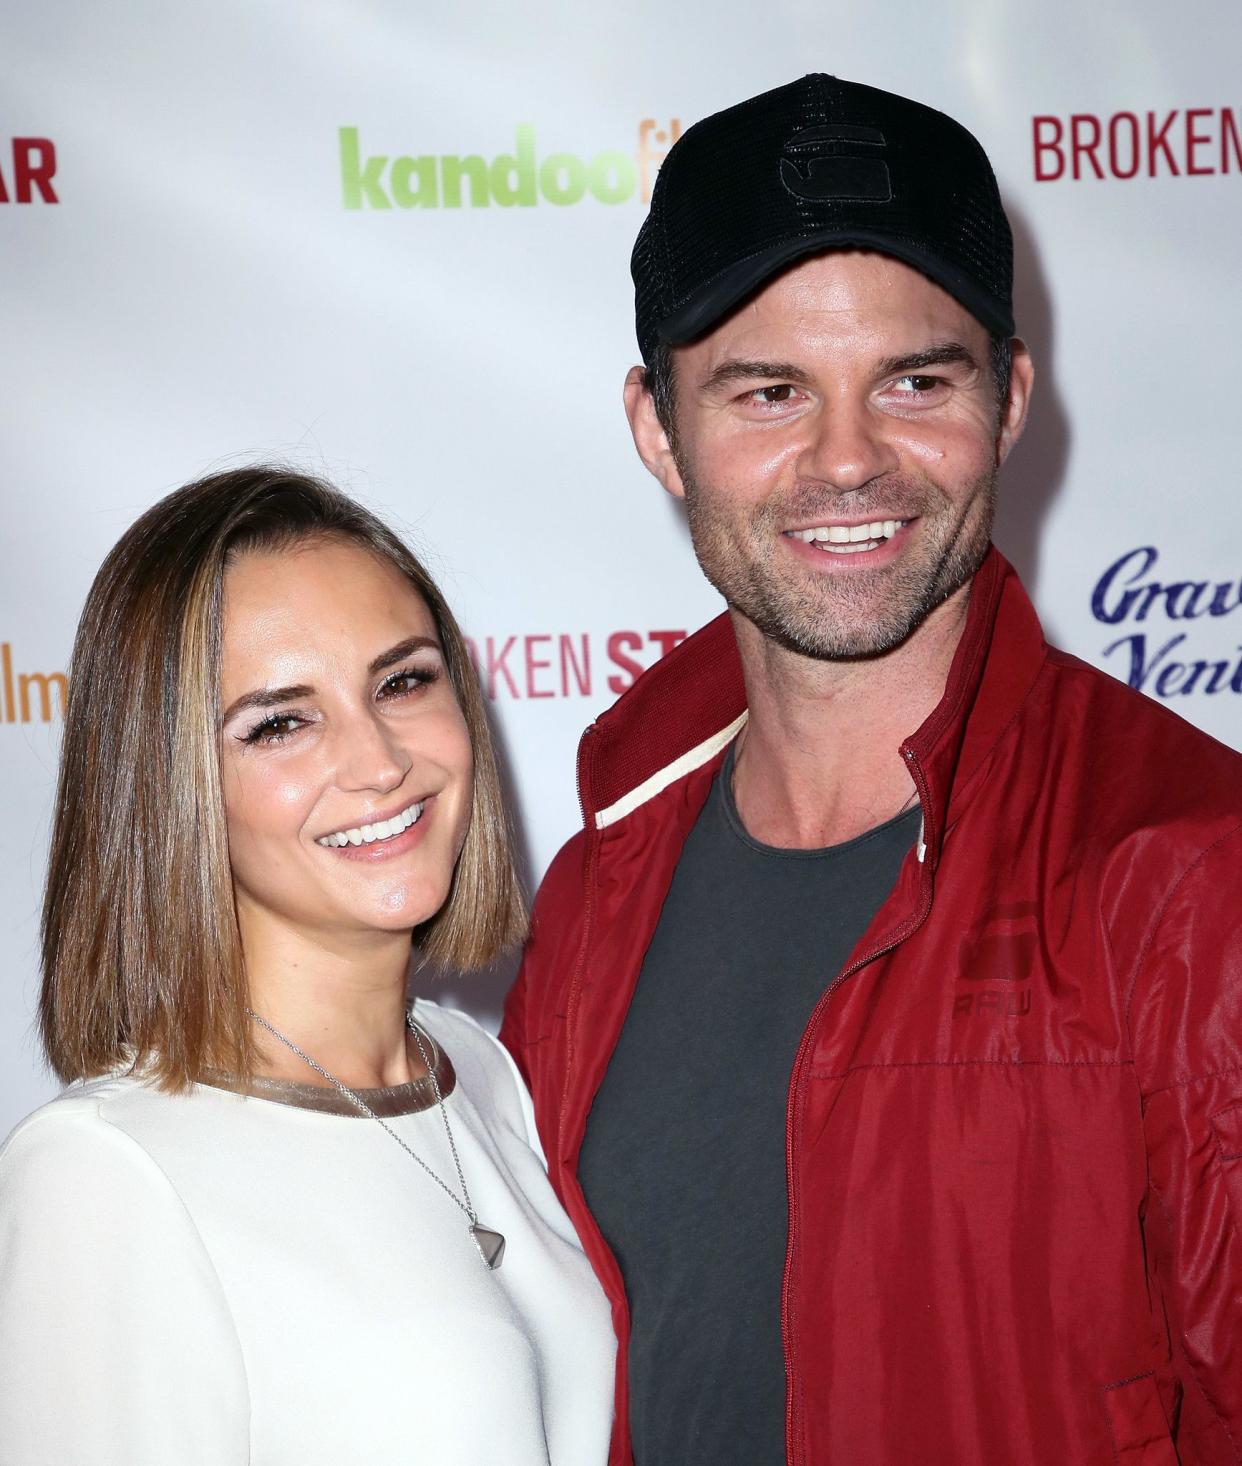 It’s over for Rachael Leigh Cook and Daniel Gillies: the “She’s All That” actress and “The Originals” actor have ended their marriage after almost 15 years together, they revealed in Instagram statements on June 13, 2019. “With deep gratitude for every year we have spent together and the thousands of beautiful memories shared, we have mutually decided to separate as a couple,” the statement reads before continuing “We love and respect each other as parents, people and artists and look forward to maintaining the best parts of our relationship for many years to come” The couple wed in 2004 and share daughter Charlotte, 5, and son, Theodore, 4.